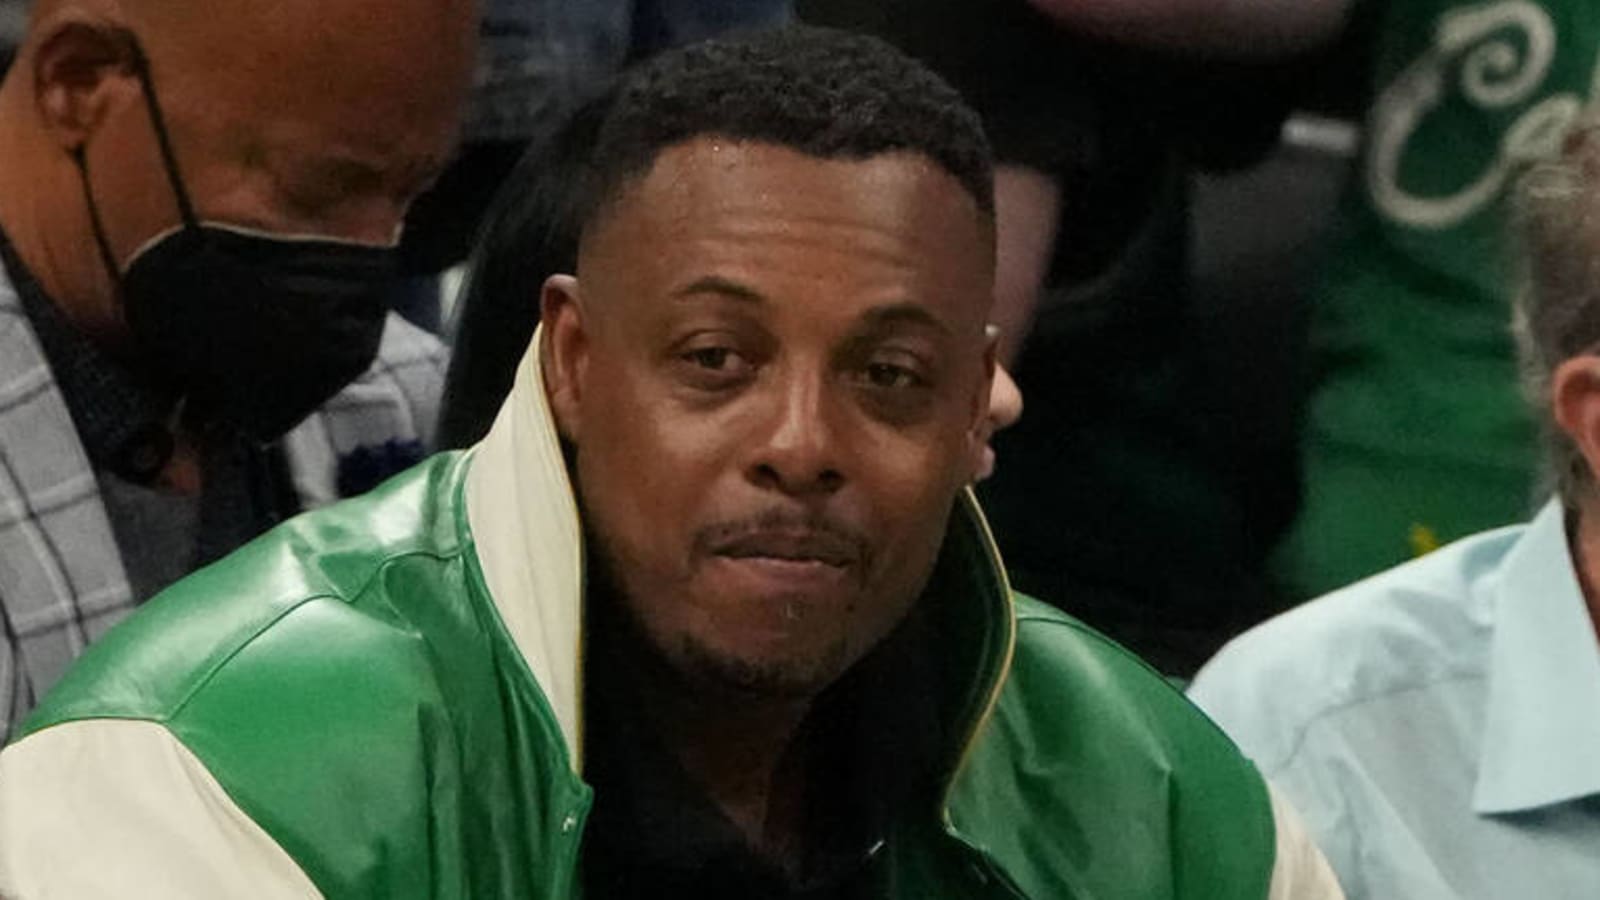 Paul Pierce doubles down after soft fans call out his clap back at Knick fan trolls